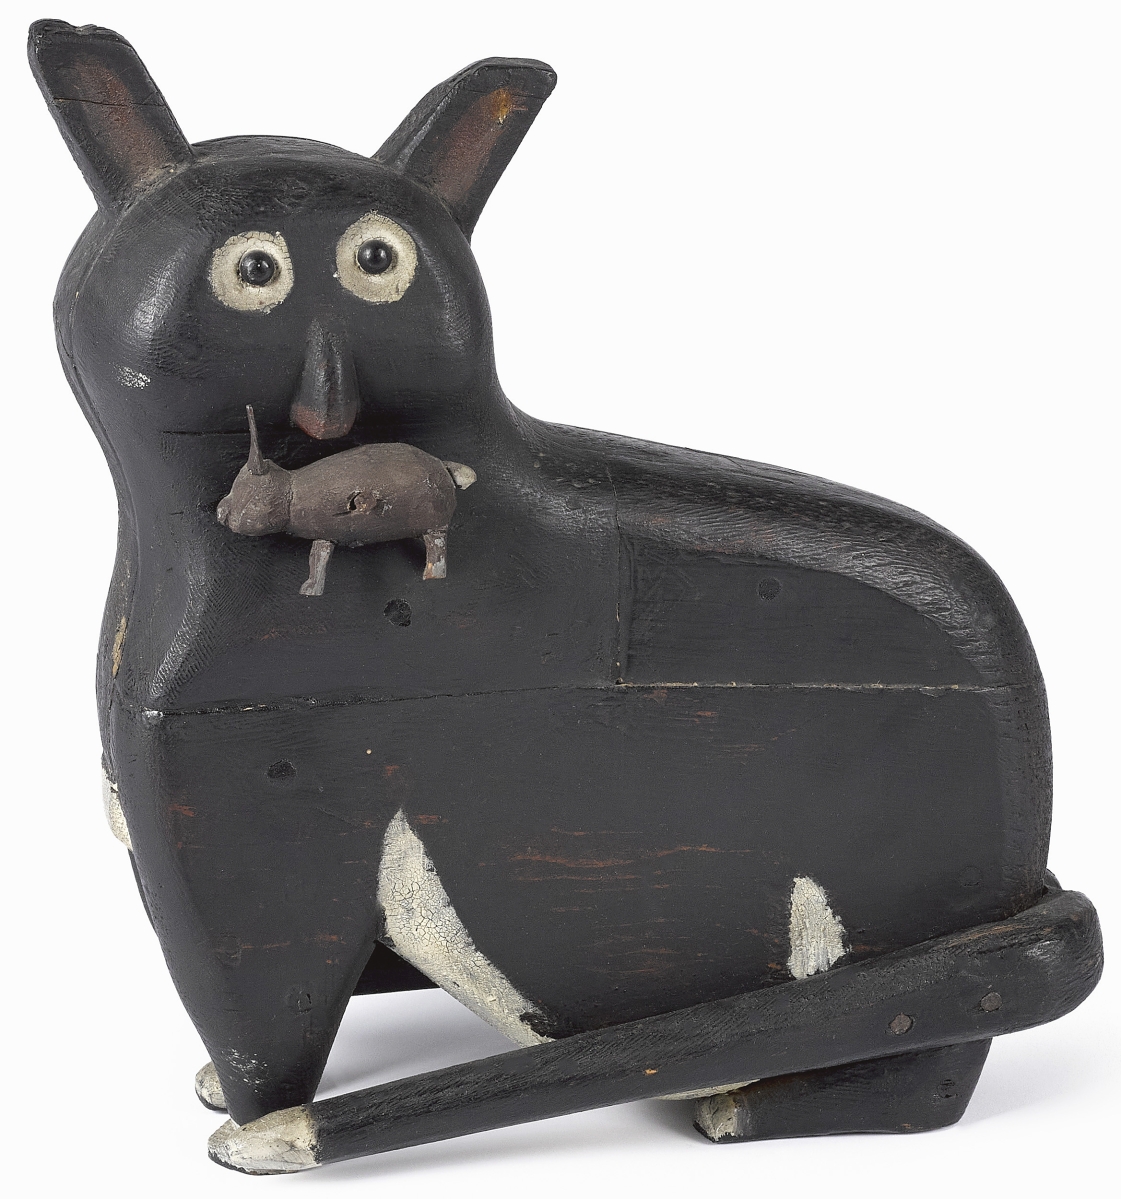 The look on this carved and painted cat — his wide eyes and bent ears — endeared it to near anyone who has ever owned a cat and dealt with their hunting behaviors before. It suggests the moment the cat is spotted by its owner having gotten yet another rabbit, seen hanging from its mouth, from the farmer’s pen: a look of getting caught. Bidders fell for it when the 11½-inch example sold for $26,840. It was exhibited at the Historical Society of Berks County in 1991 and featured in Machmer’s Just For Nice.